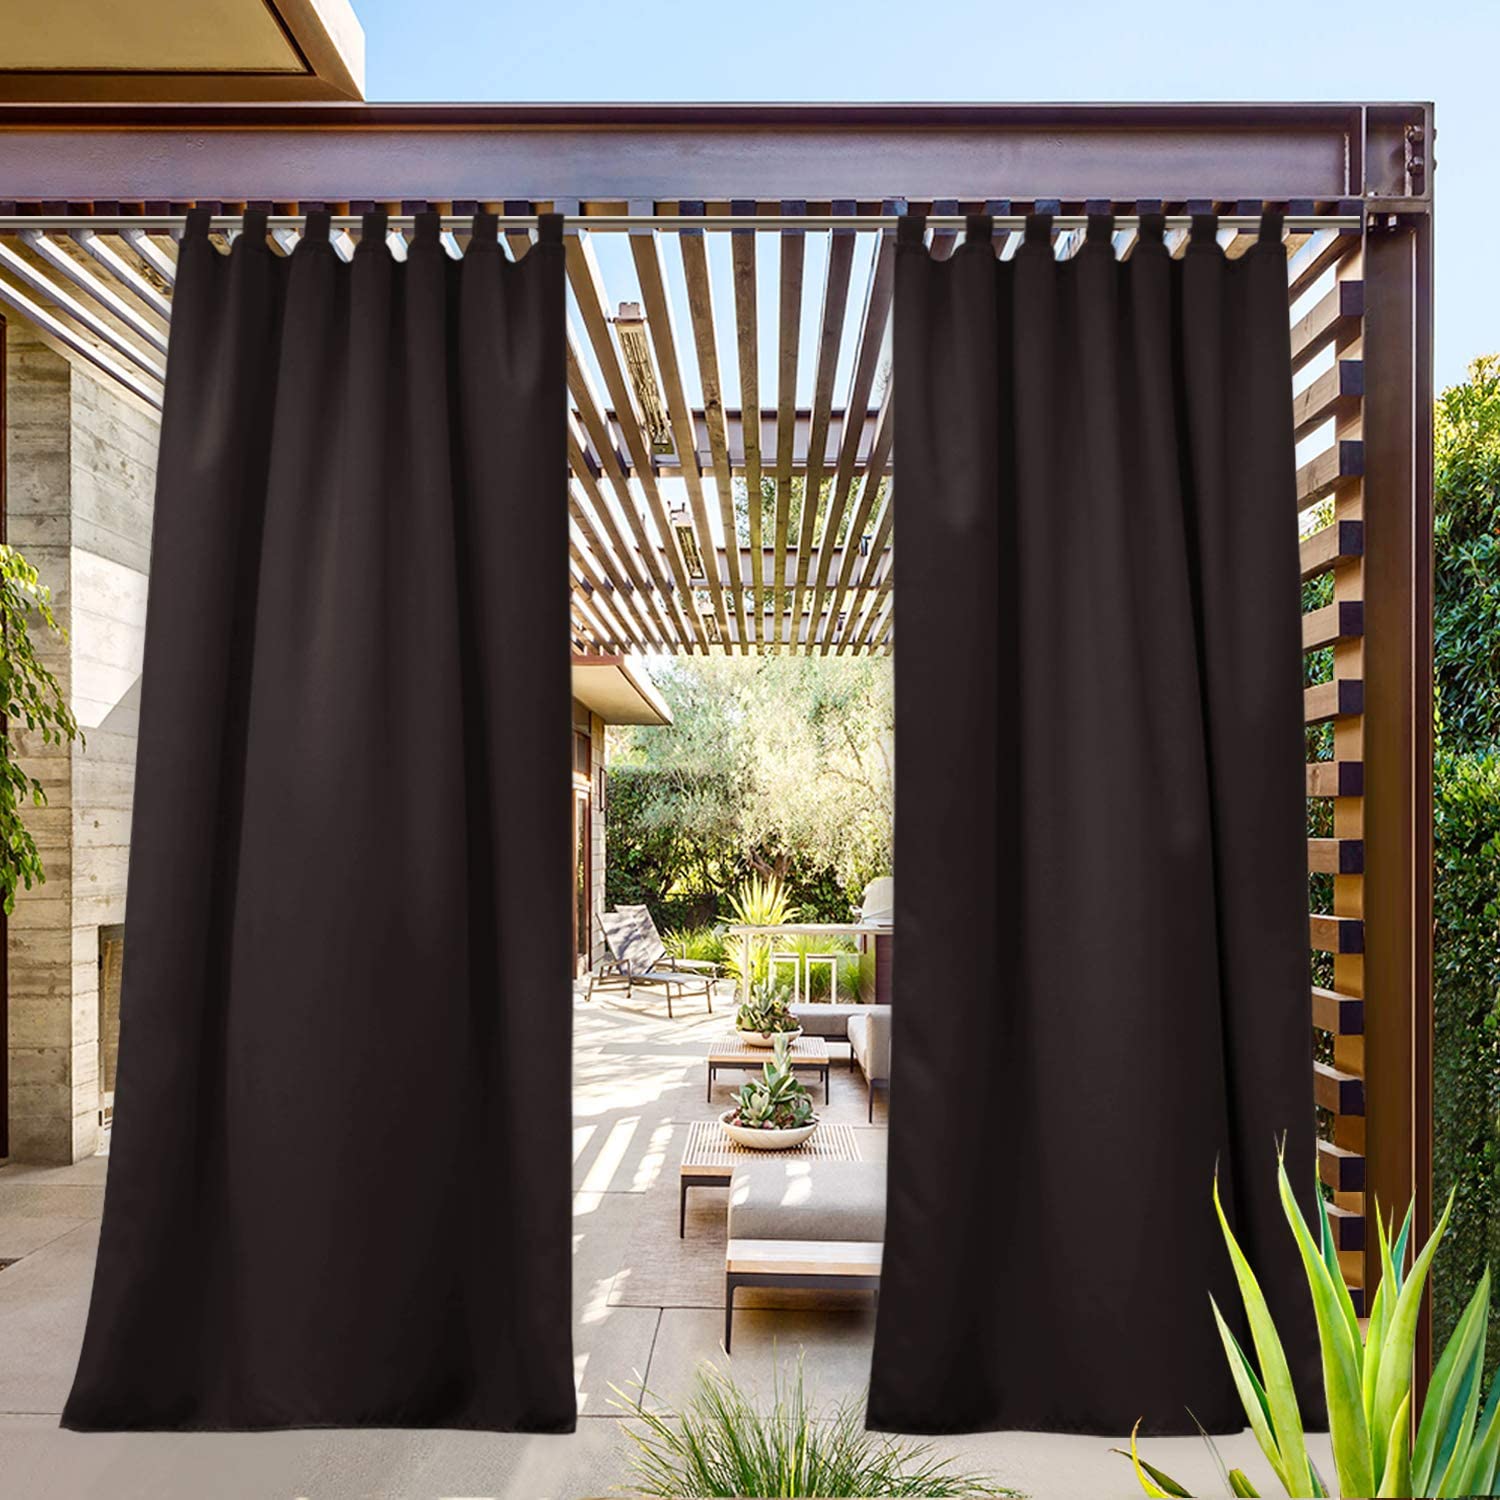 1 Pc, 52 W x 108 L, Greyish White NICETOWN Waterproof Outdoor Curtains for Yard/Cabana Room Darkening Detachable Tab Top Window Treatments with Self-Stick 